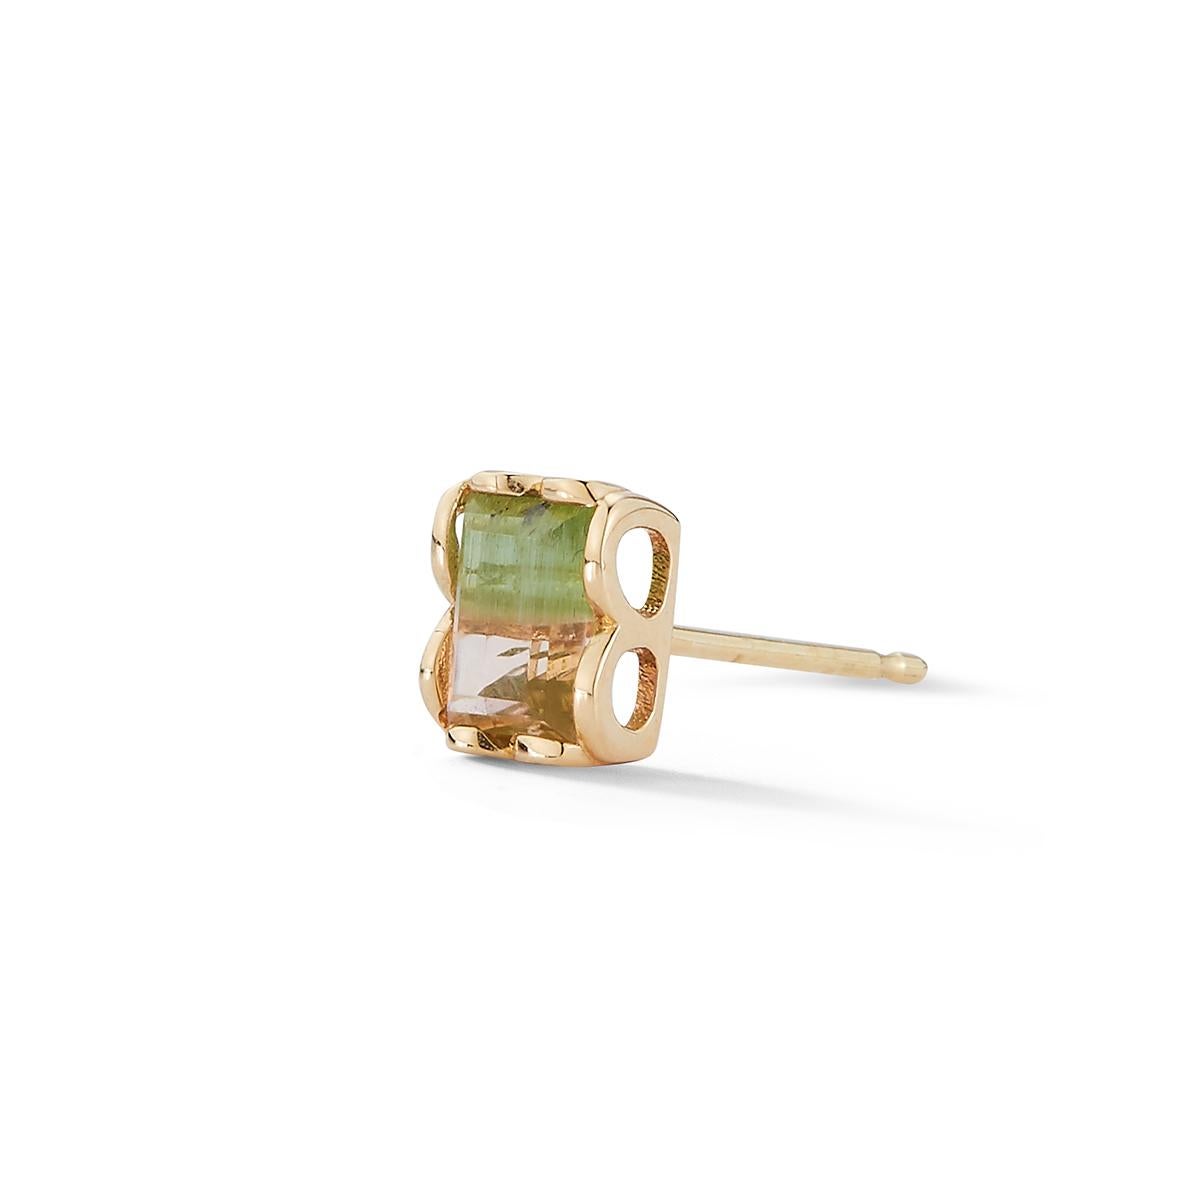 Rectangle shape Tourmaline stone set in a scalloped open work setting.
Easy to wear and great for mixing with your favorite single earrings to updated your
ear game. Sold as a SINGLE earring, get two to wear them as a pair.

Inspired by seeing the